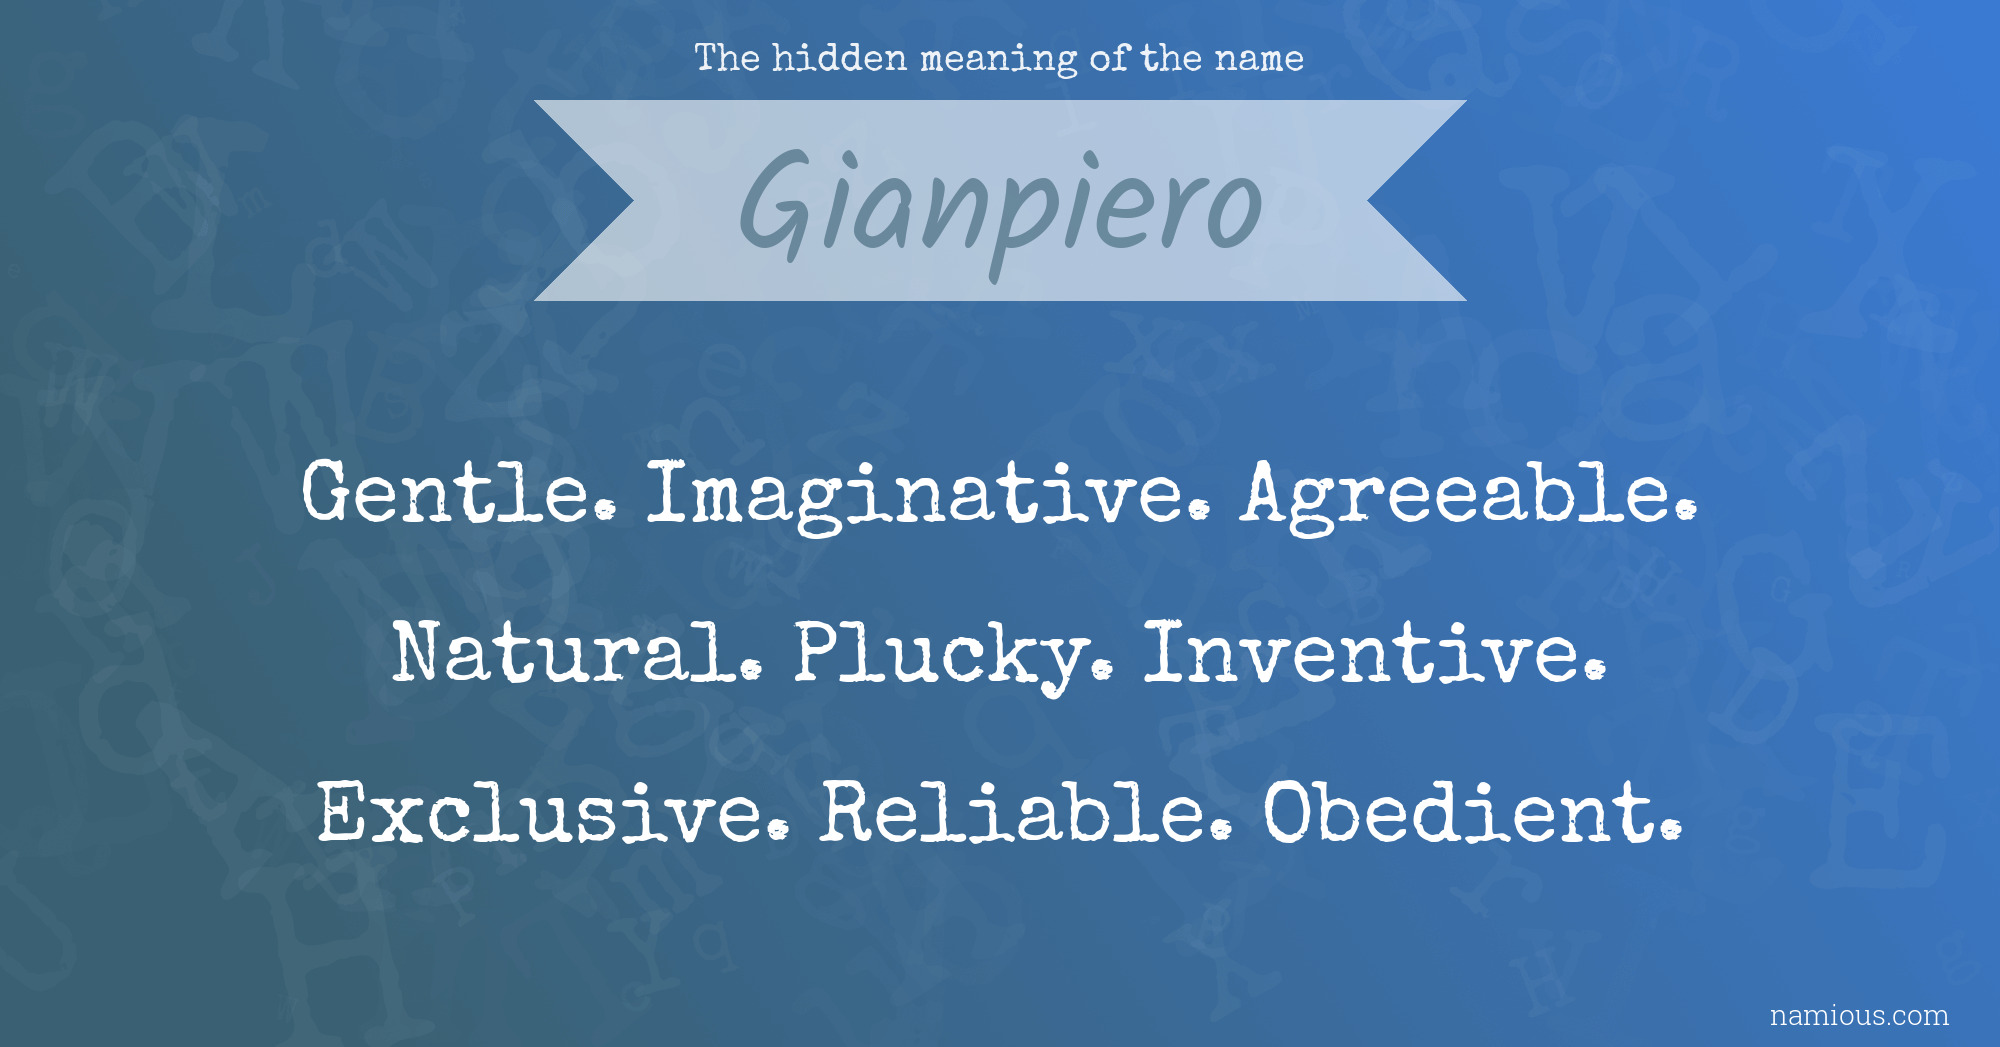 The hidden meaning of the name Gianpiero